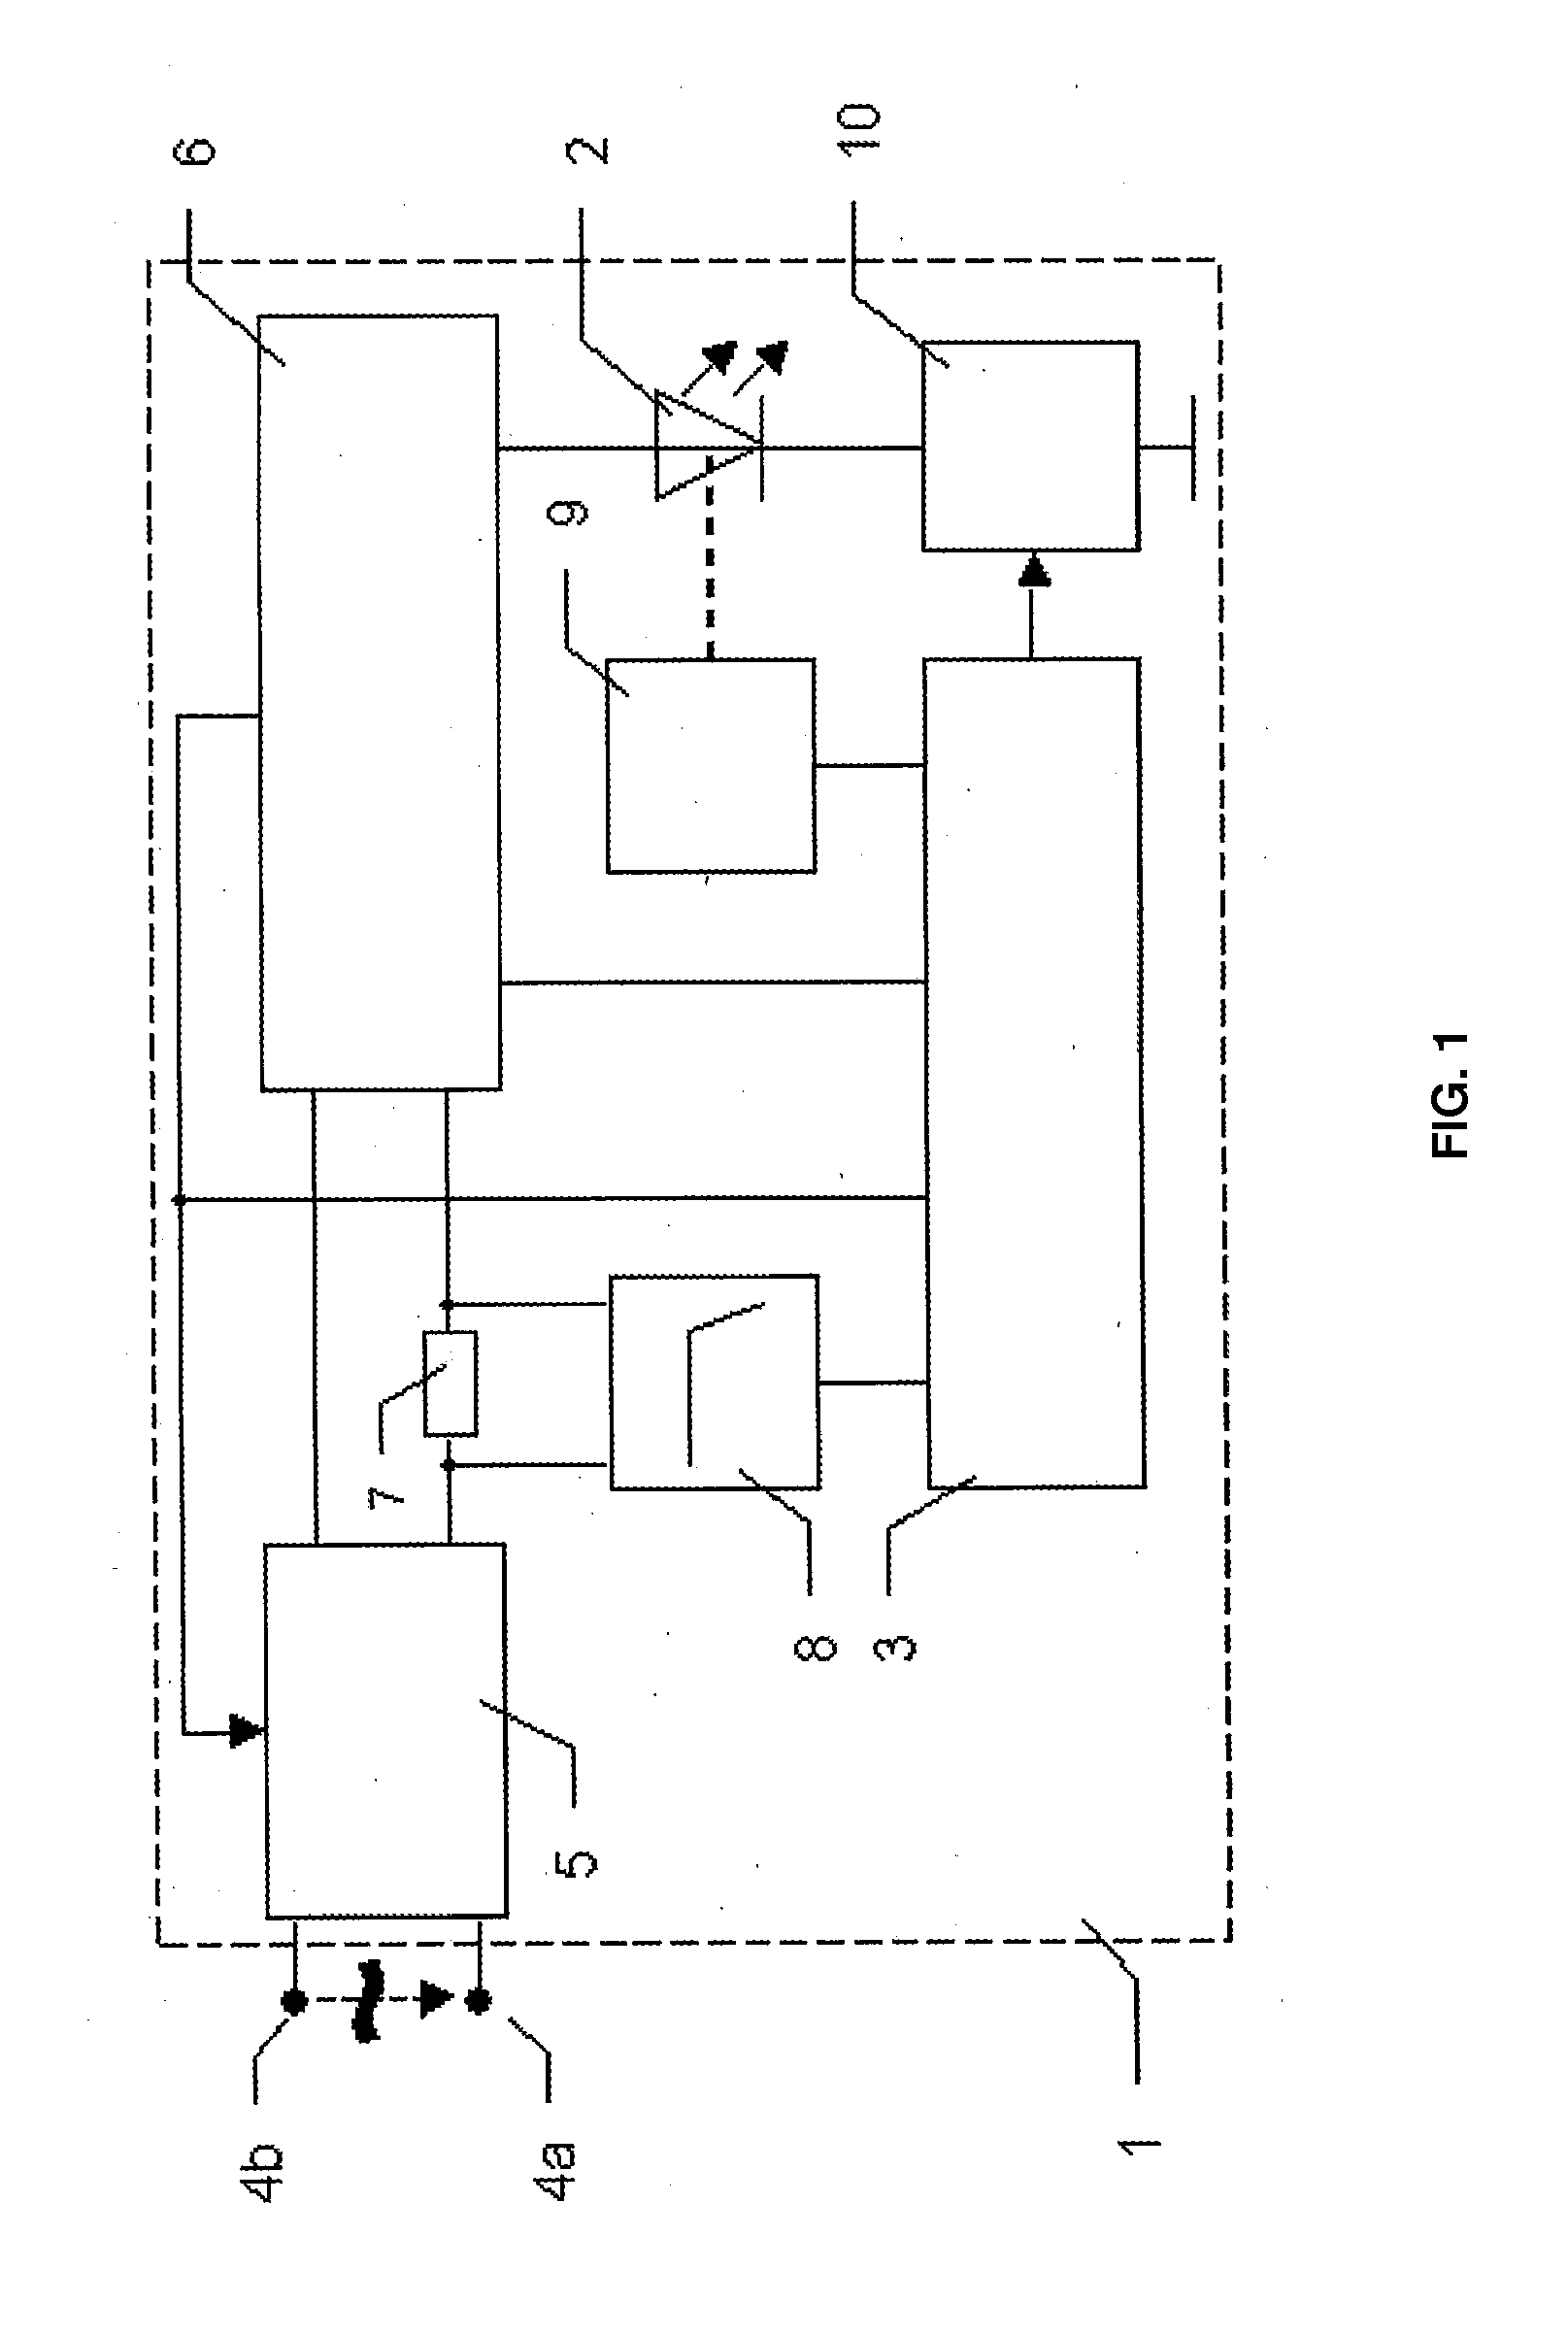 Lighting device for identifying and marking traffic areas of airports